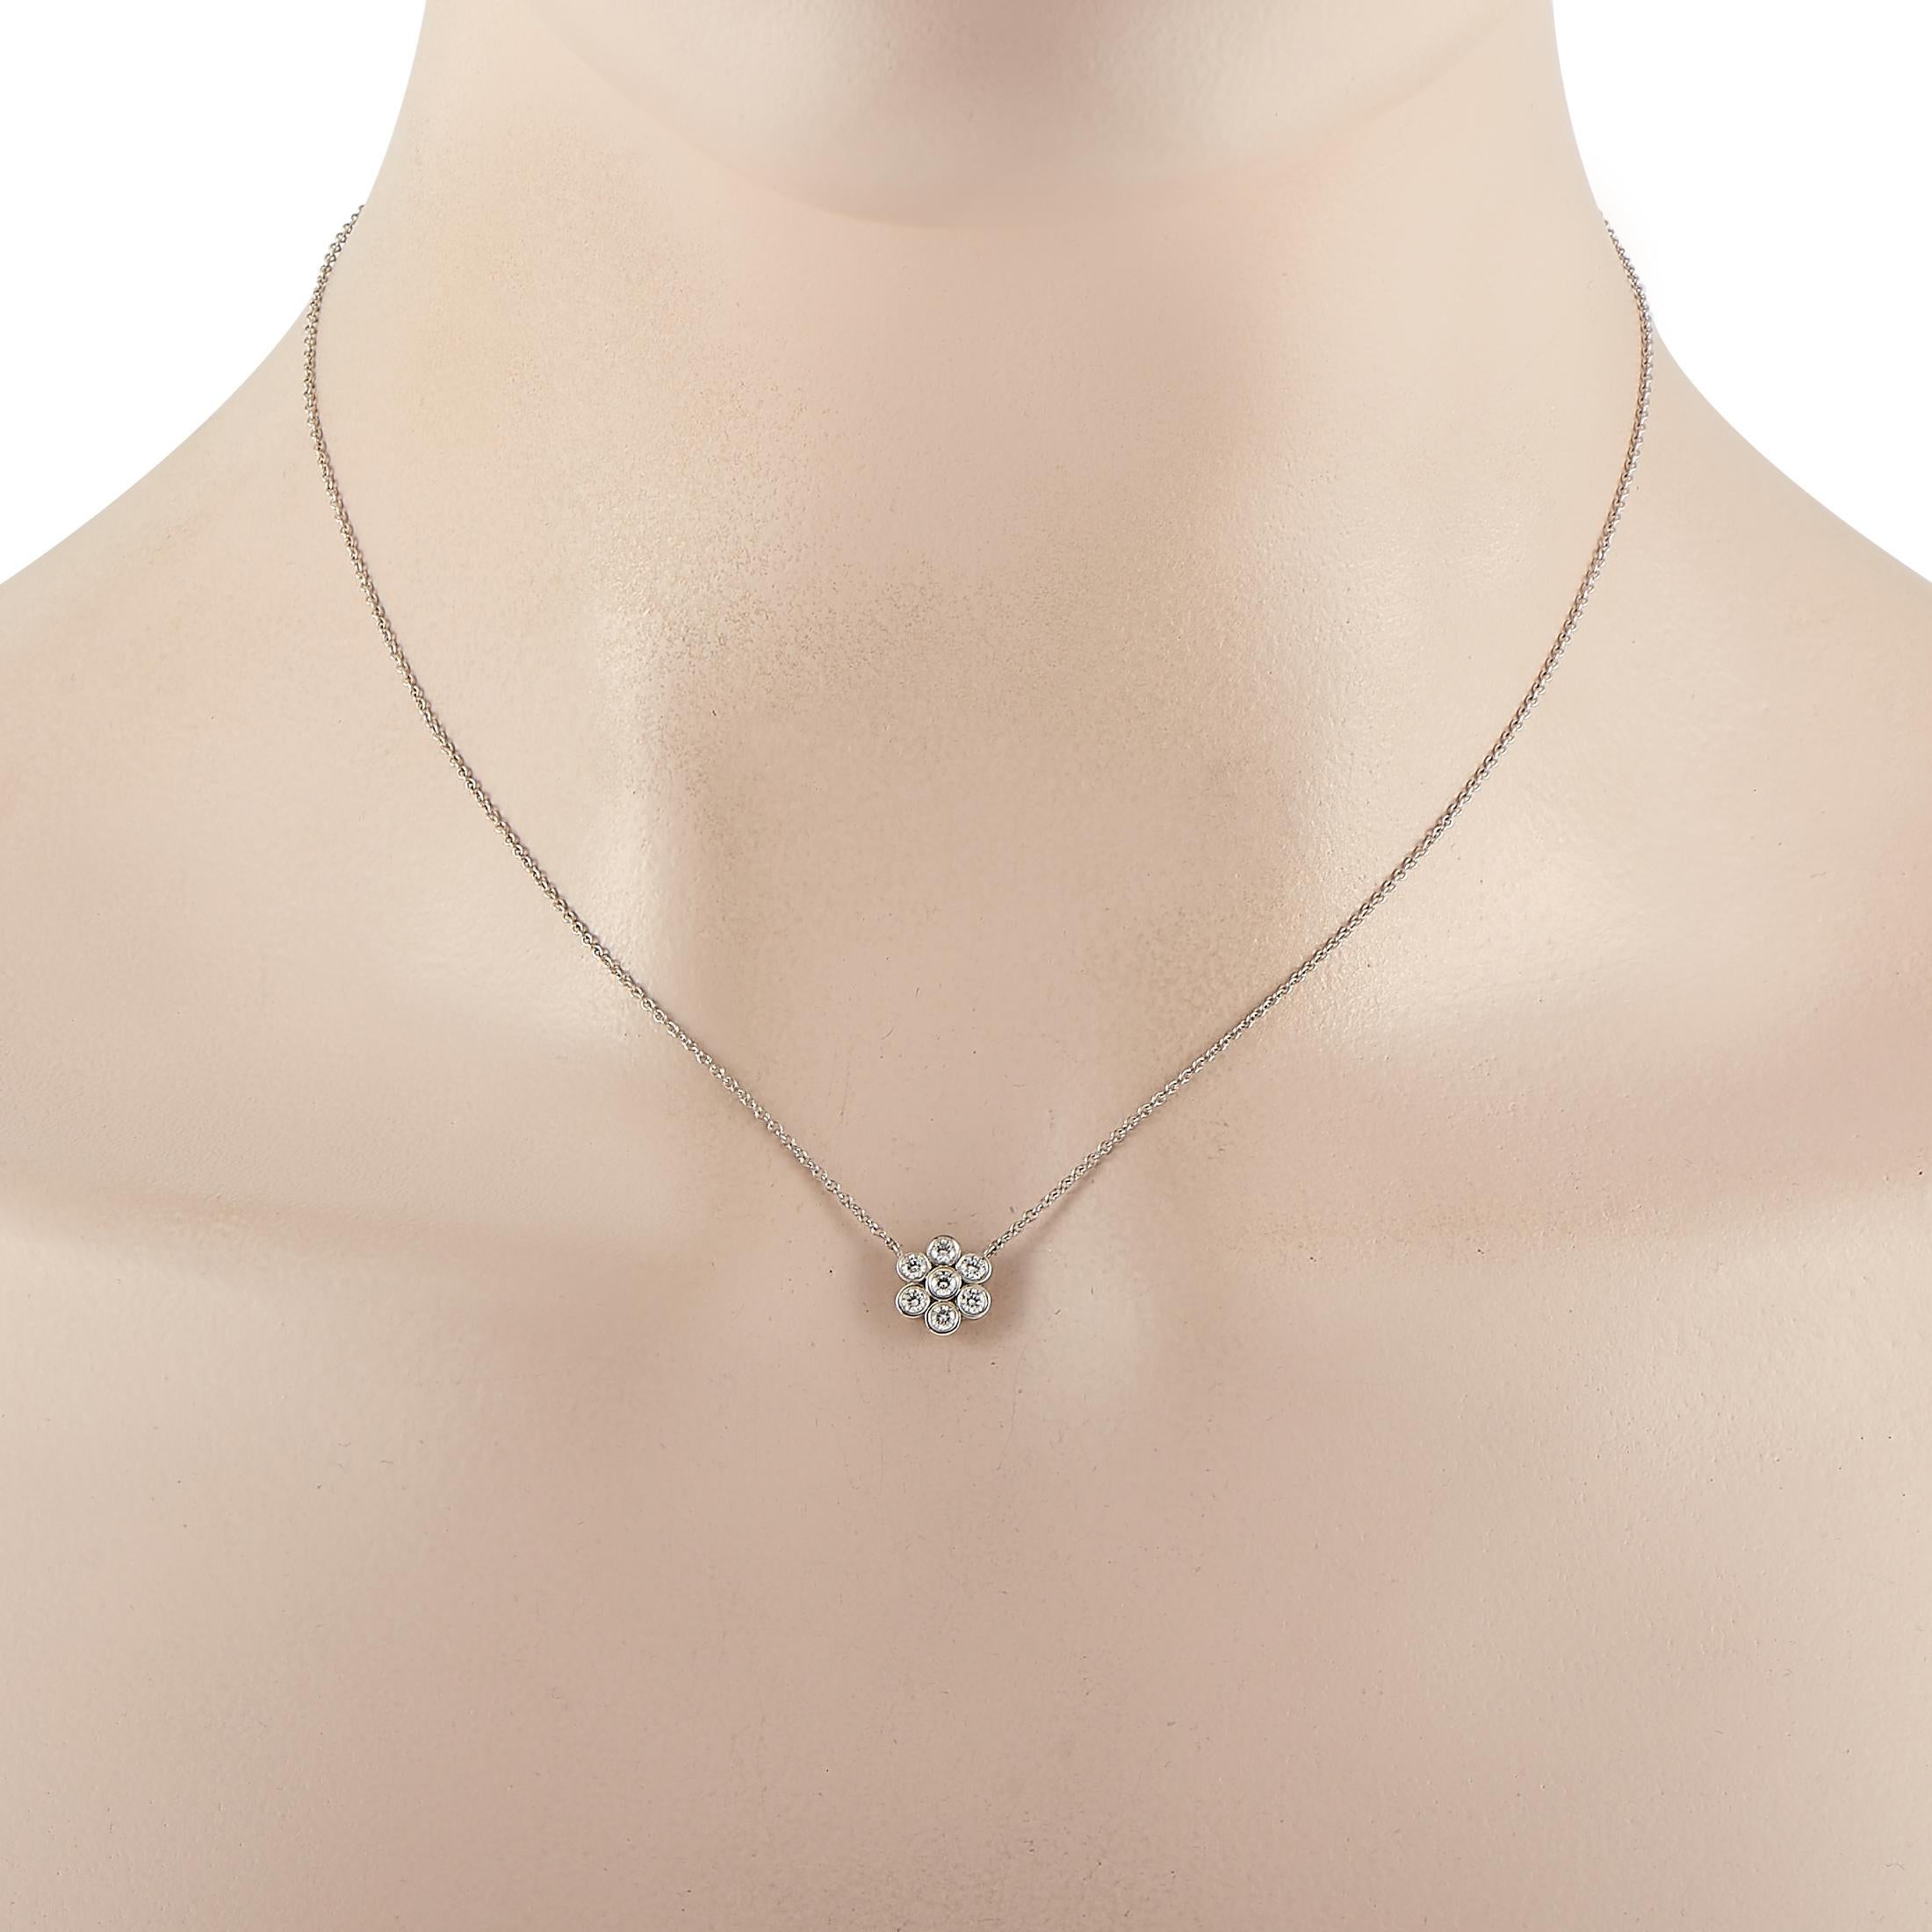 Displaying a flower-shaped cluster of bezel-set round diamonds, the Tiffany & Co. Platinum 0.25 Diamond Flower Necklace will effortlessly bring an elegant and feminine flair to your looks. The ultra-gorgeous and extremely sparkly pendant has seven